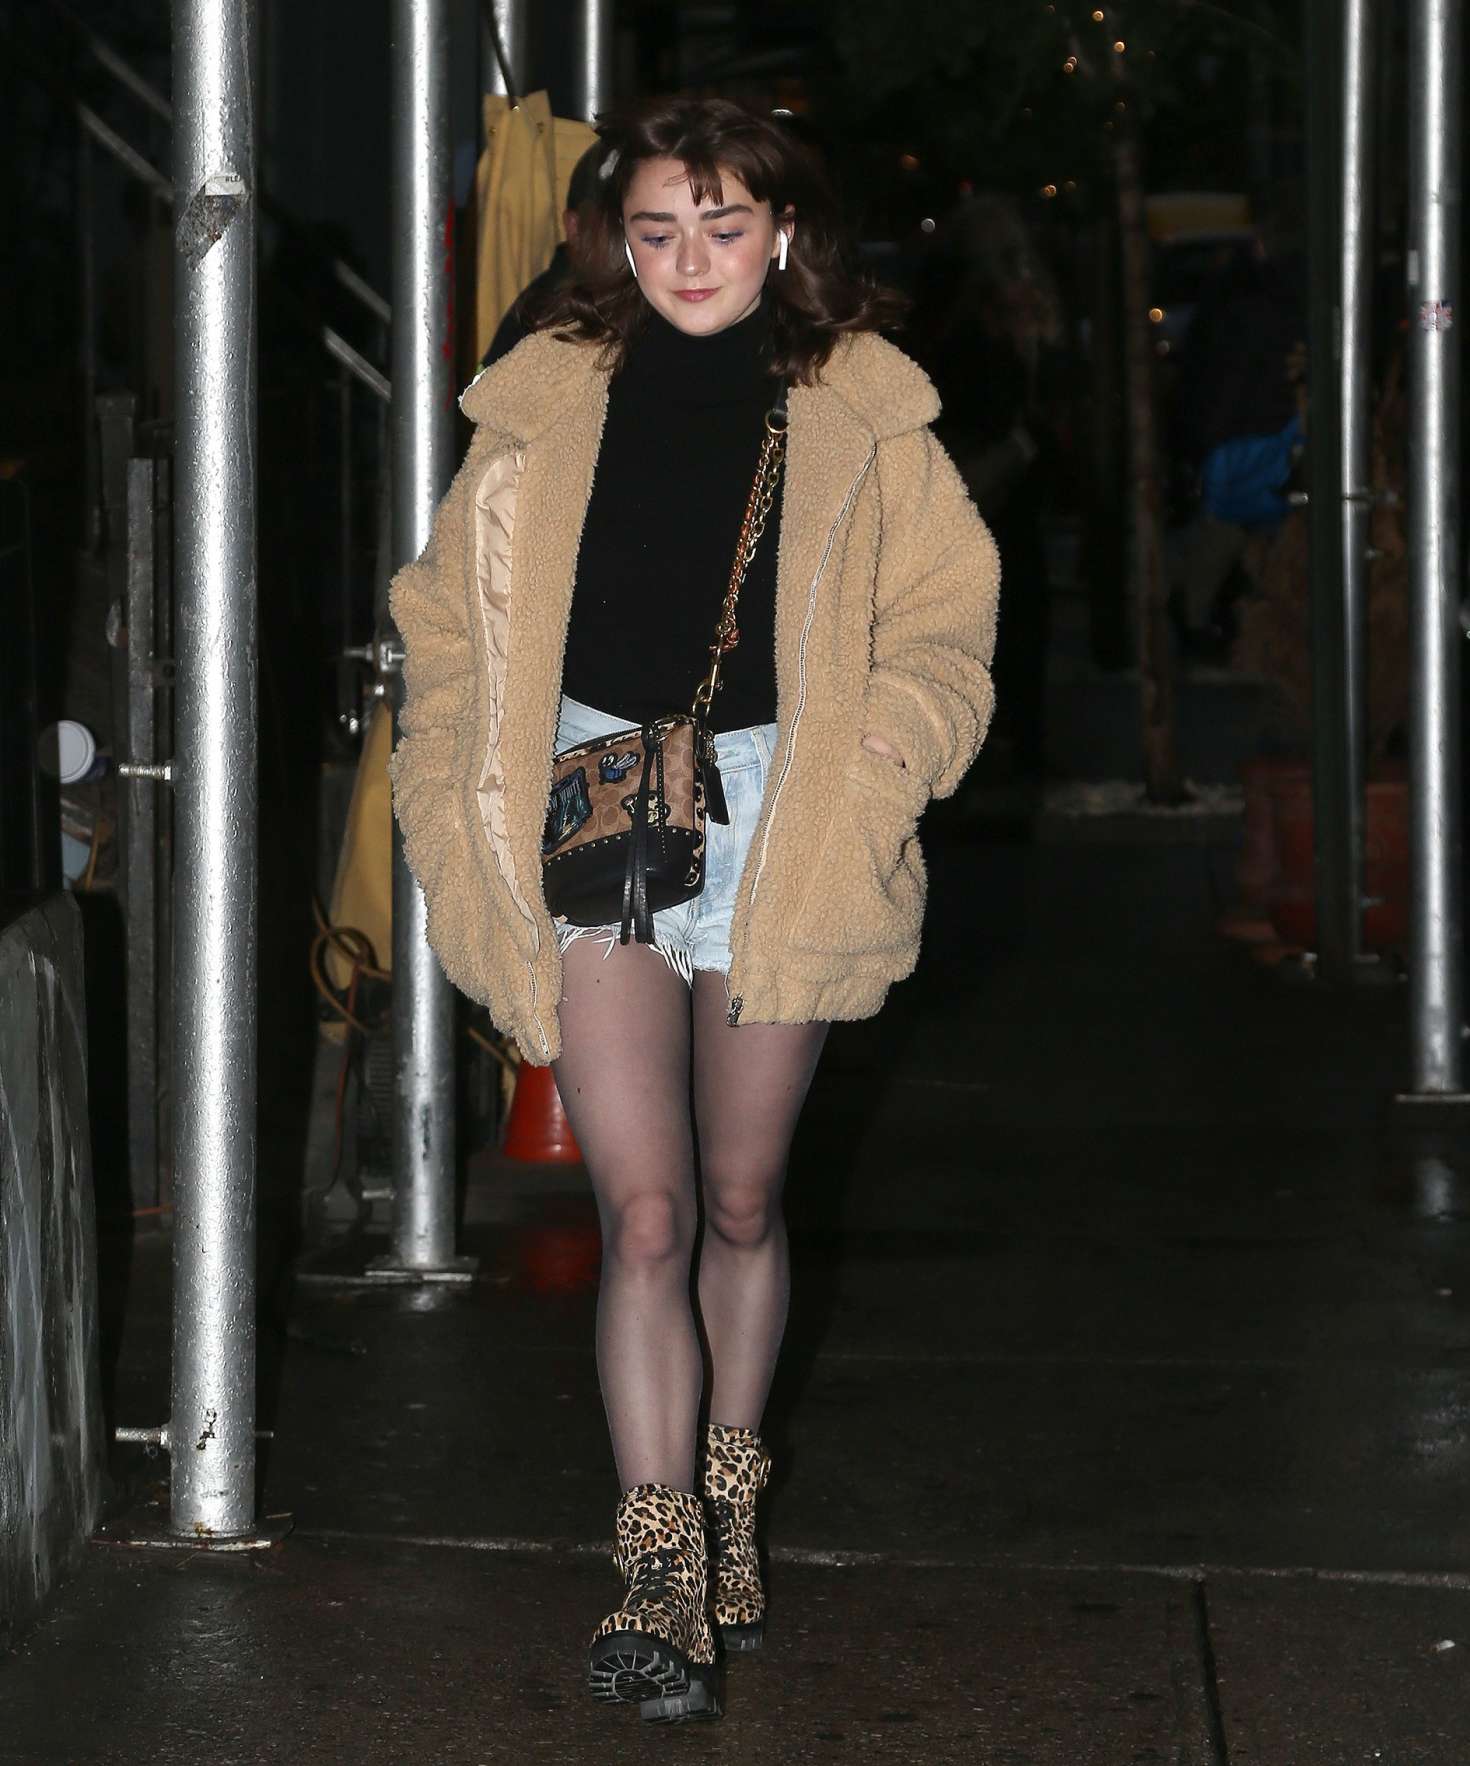 Maisie Williams in Daisy Duke Shorts â€“ Out in New York City